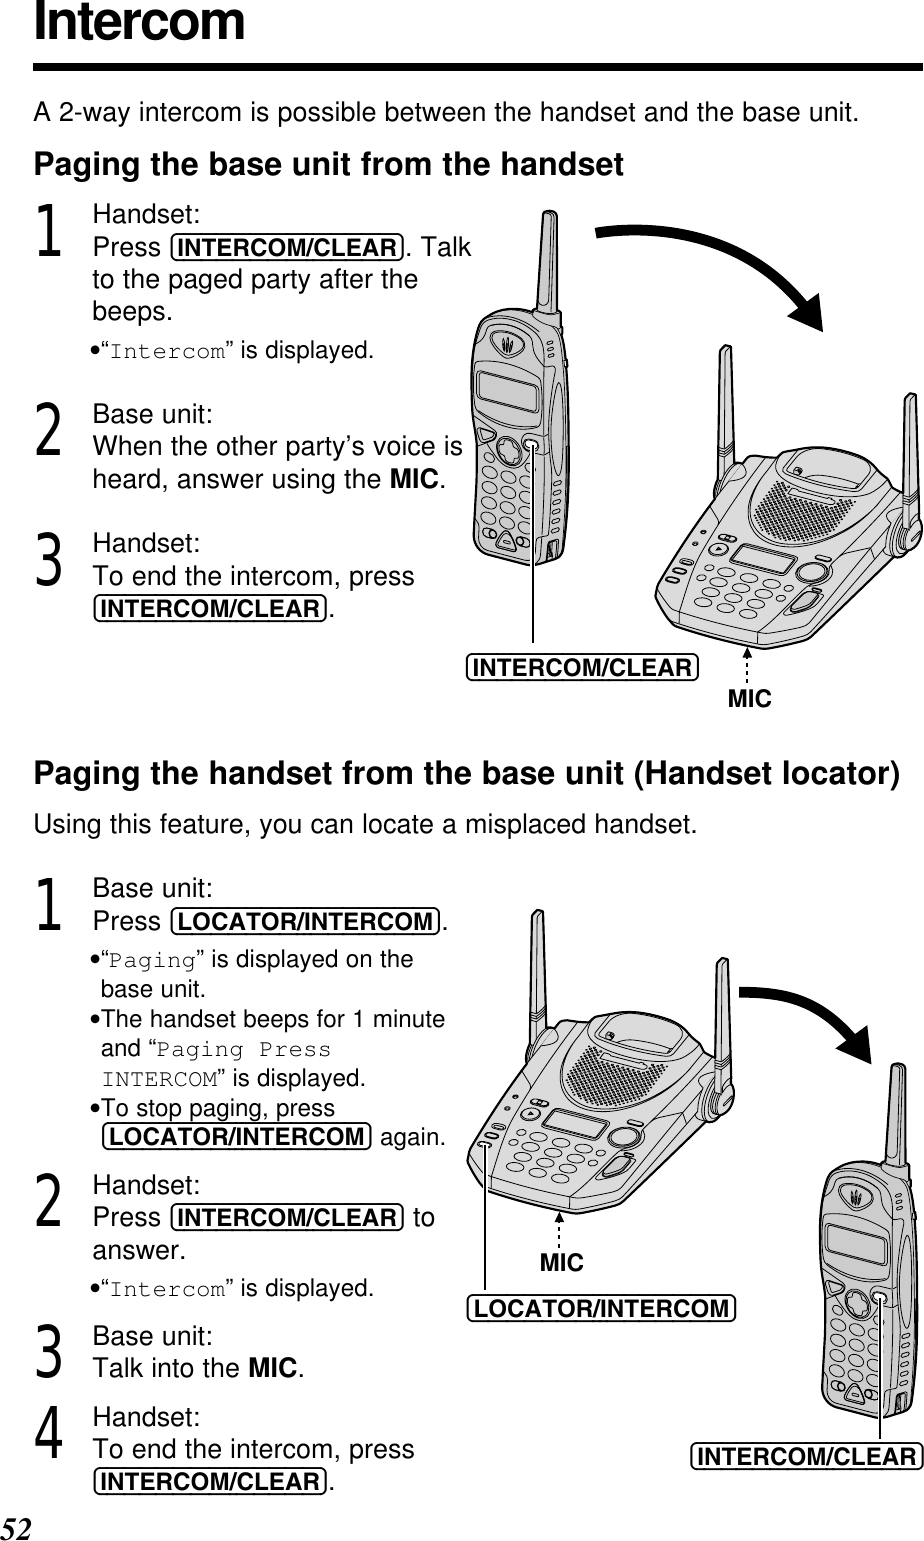 52IntercomA 2-way intercom is possible between the handset and the base unit.Paging the base unit from the handset1Handset:Press (INTERCOM/CLEAR). Talkto the paged party after thebeeps.•“Intercom” is displayed.2Base unit:When the other party’s voice isheard, answer using the MIC.3Handset:To end the intercom, press(INTERCOM/CLEAR).Paging the handset from the base unit (Handset locator)Using this feature, you can locate a misplaced handset.1Base unit:Press (LOCATOR/INTERCOM).•“Paging” is displayed on the base unit.•The handset beeps for 1 minuteand “Paging Press INTERCOM” is displayed.•To stop paging, press(LOCATOR/INTERCOM) again.2Handset:Press (INTERCOM/CLEAR) toanswer.•“Intercom” is displayed.3Base unit:Talk into the MIC.4Handset:To end the intercom, press(INTERCOM/CLEAR).(INTERCOM/CLEAR)MIC(INTERCOM/CLEAR)(LOCATOR/INTERCOM)MIC